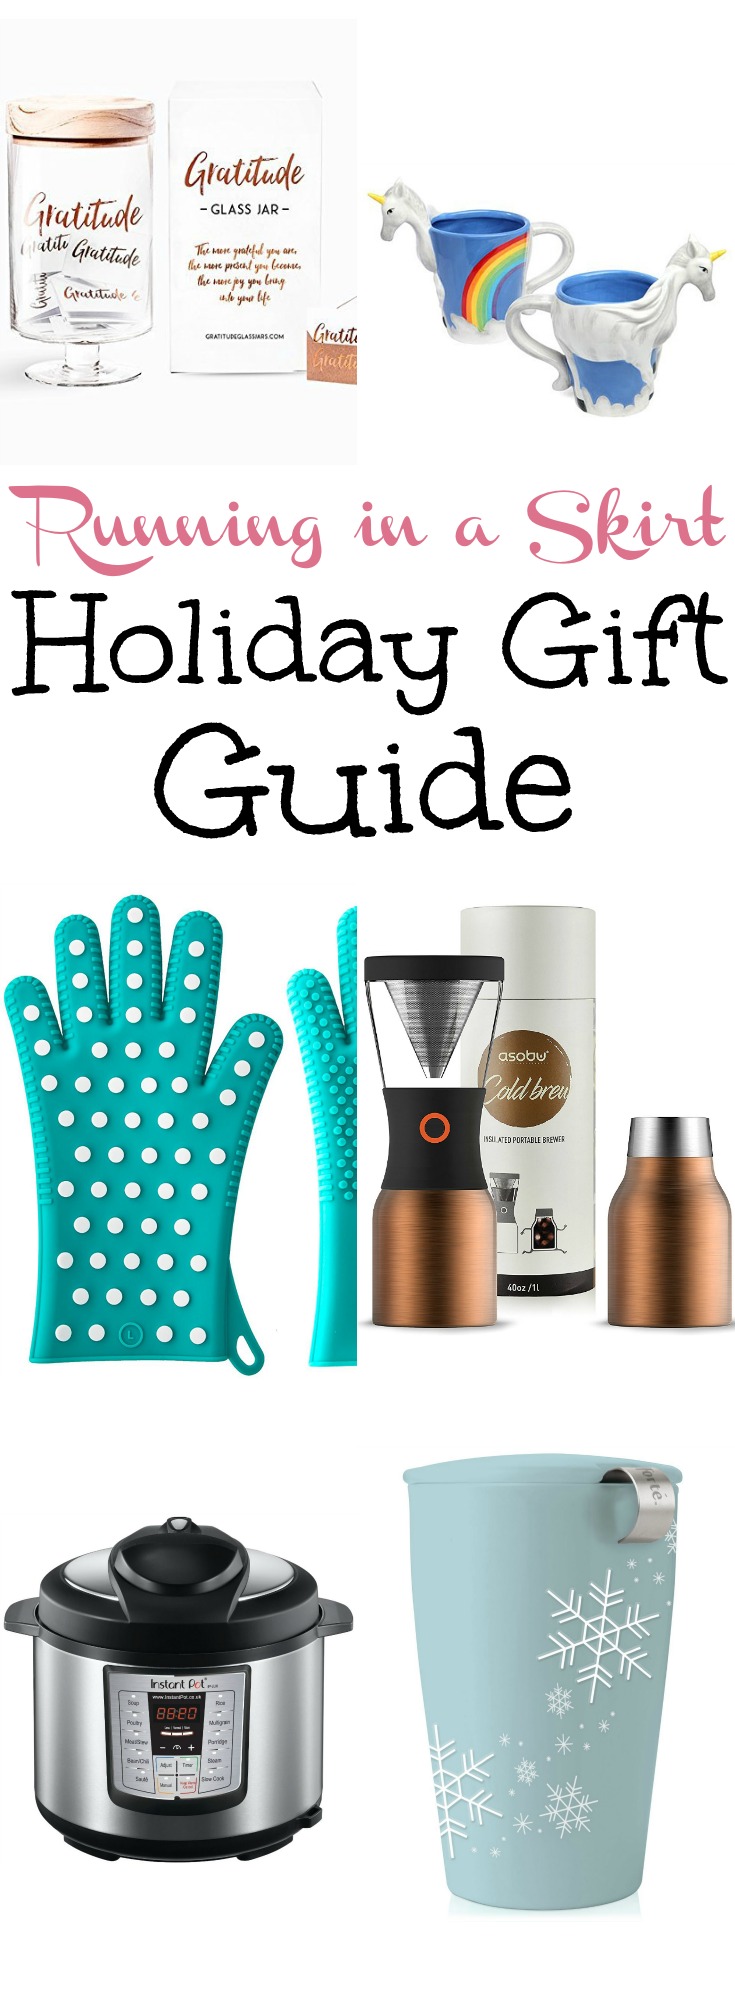 2017 Holiday Gift Guide for Her!  Includes cute gift ideas for women at any price point. / Running in a Skirt via @juliewunder